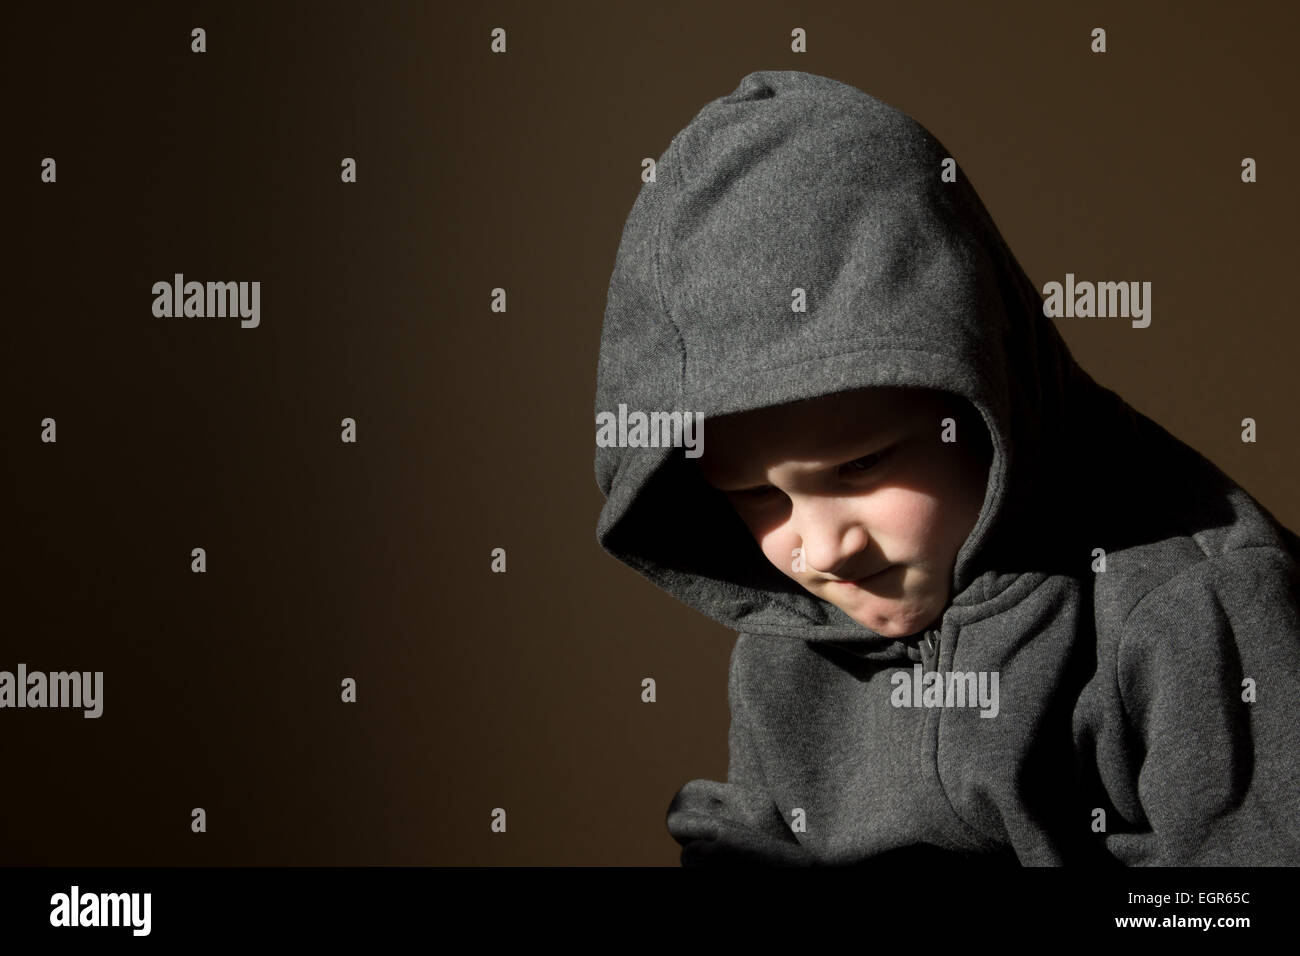 Sad upset tired worried unhappy little child (boy) close up horizontal dark portrait with copy space Stock Photo